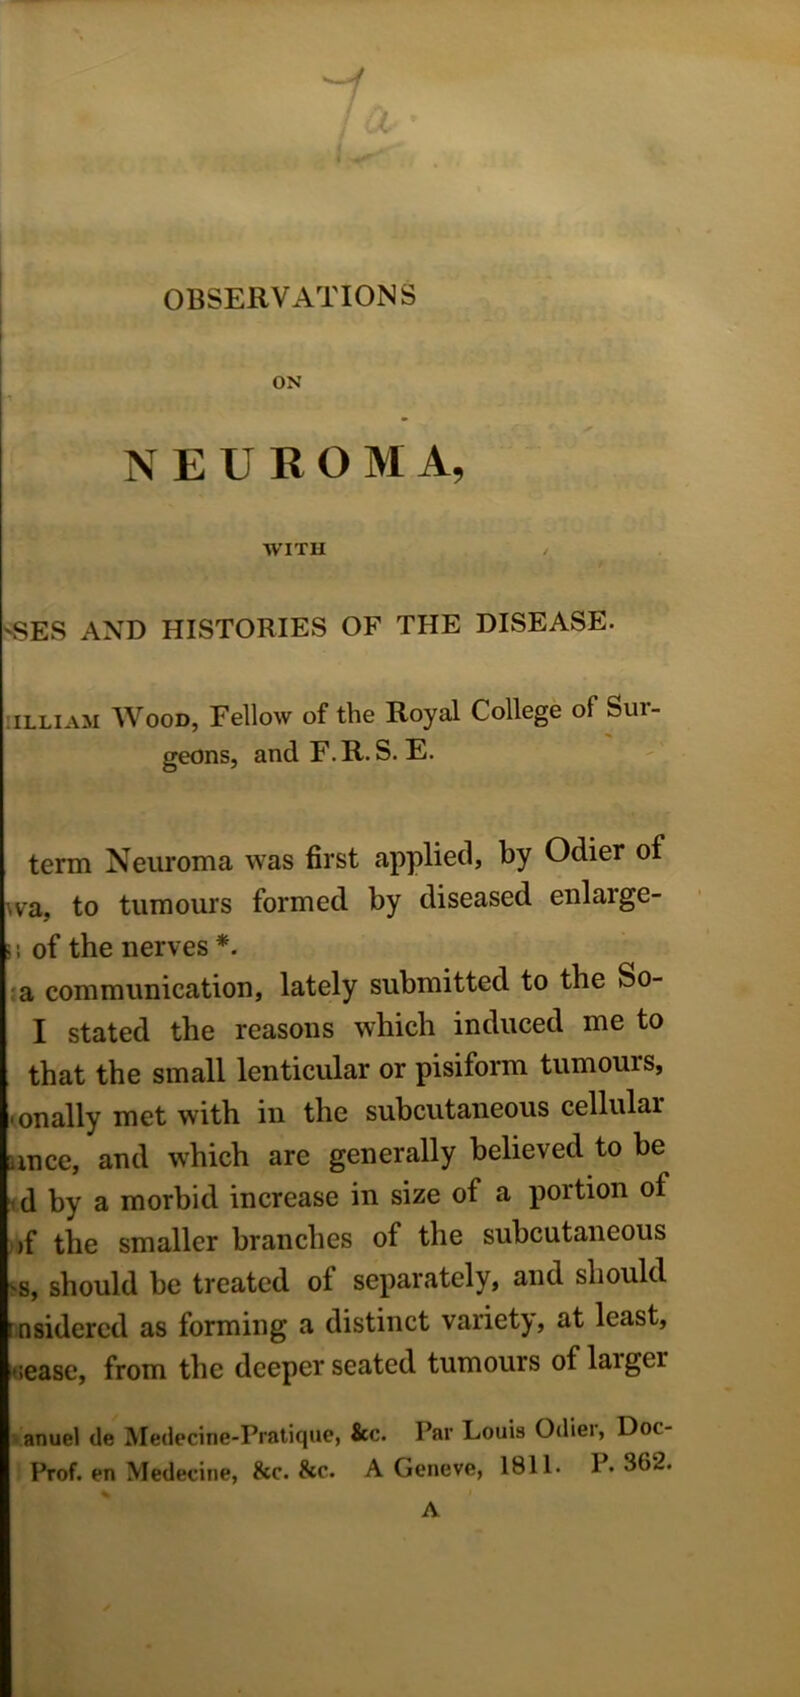 OBSERVATIONS ON NEUROMA, WITH 'SES AND HISTORIES OF THE DISEASE. illiam Wood, Fellow of the Royal College of Sui- geons, and F.R.S. E. term Neuroma was first applied, by Odier of va, to tumours formed by diseased enlarge- s; of the nerves *. a communication, lately submitted to the So- I stated the reasons which induced me to that the small lenticular or pisiform tumours, , on ally met with in the subcutaneous cellular ance, and which are generally believed to be d by a morbid increase in size of a portion of )f the smaller branches of the subcutaneous 'S, should be treated of separately, and should r nsidered as forming a distinct variety, at least, sease, from the deeper seated tumours of laigei anuel de Medecine-Pratique, &c. Par Louis Odiei, Dot- Prof. en Medecine, &c. &c. A Geneve, 1811. P« 382. A